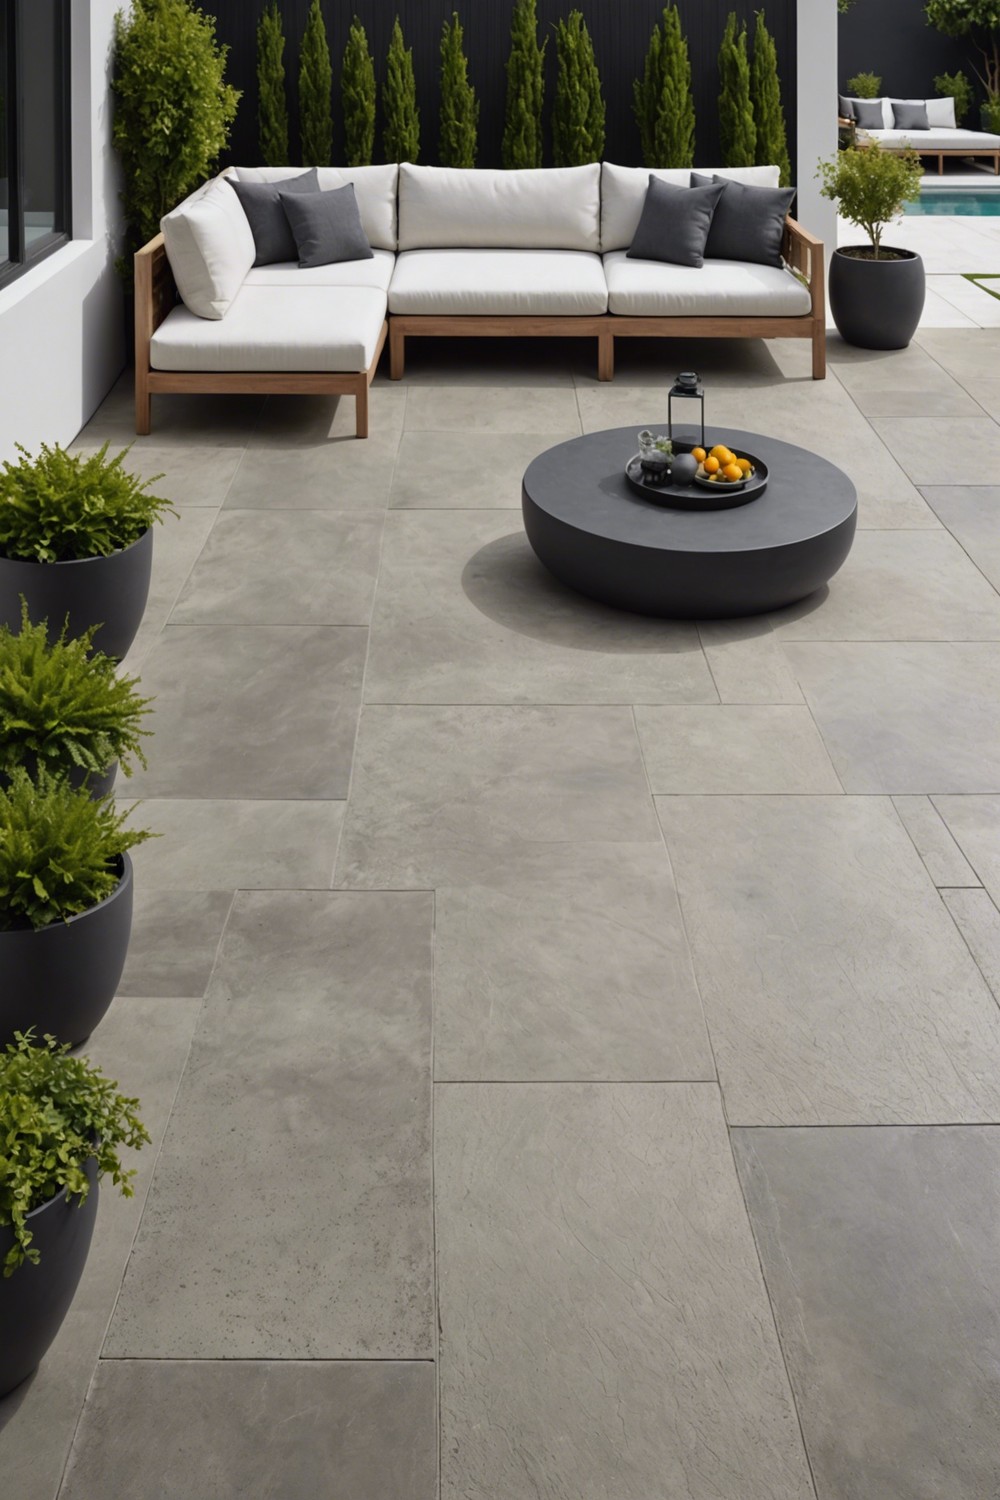 Textured Concrete for a Modern Look